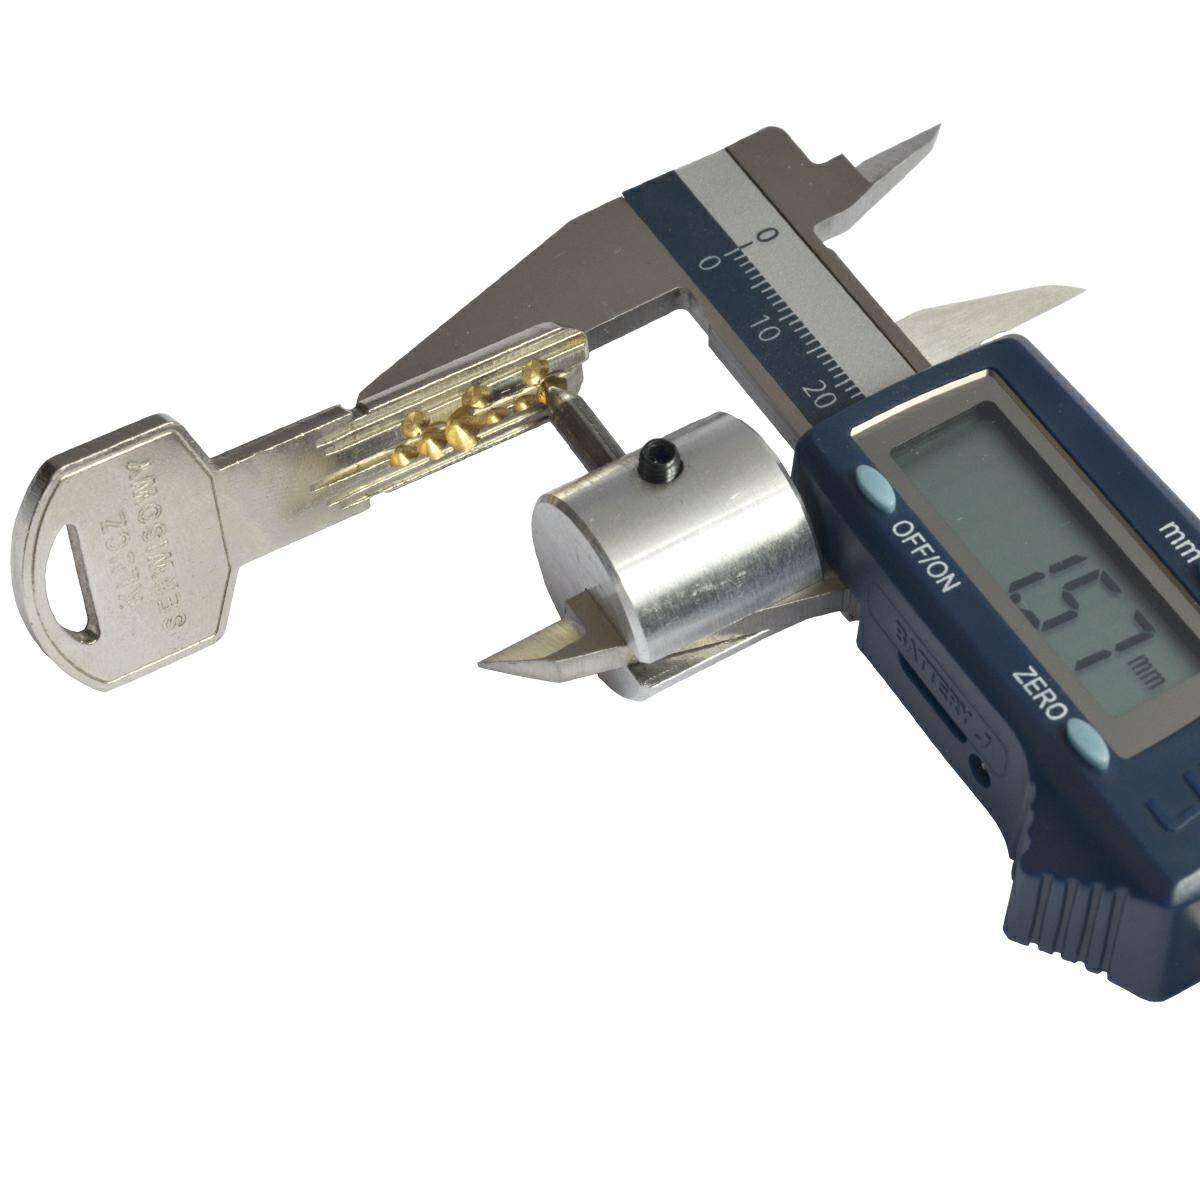 Calipers adapter for measuring the depth of key cuts